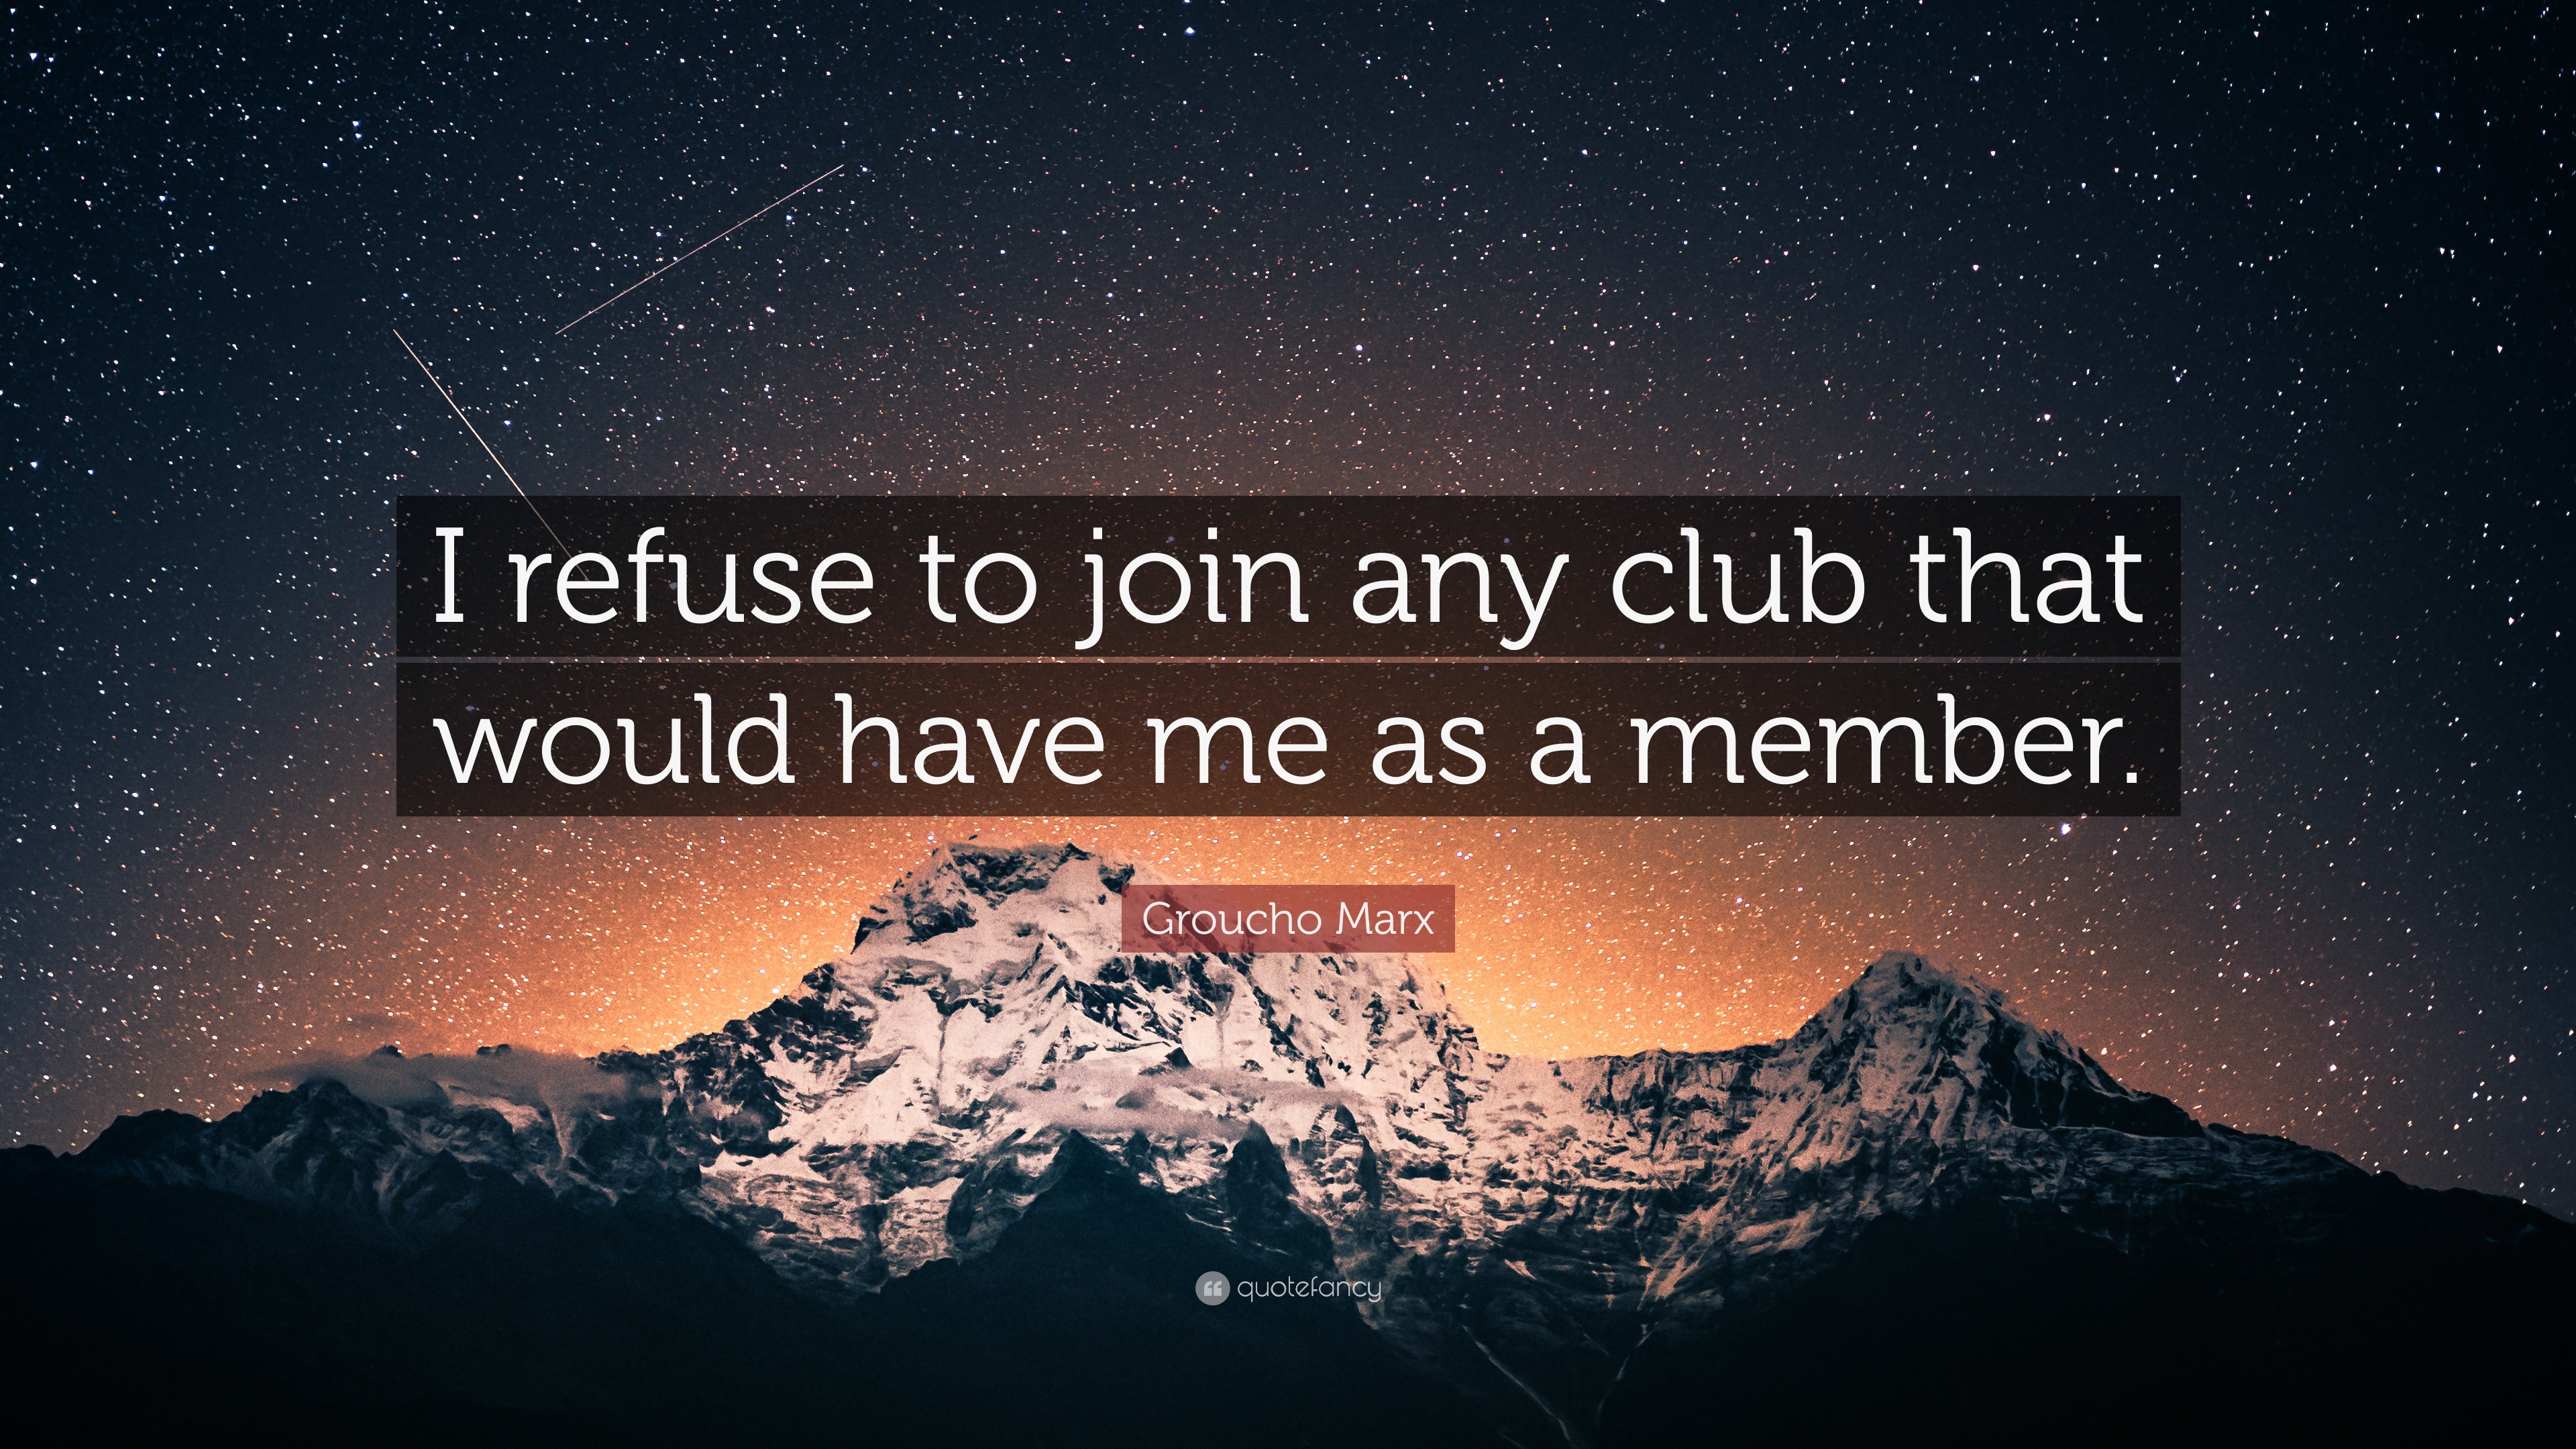 Groucho Marx Quote: “I refuse to join any club that would have me as a  member.”